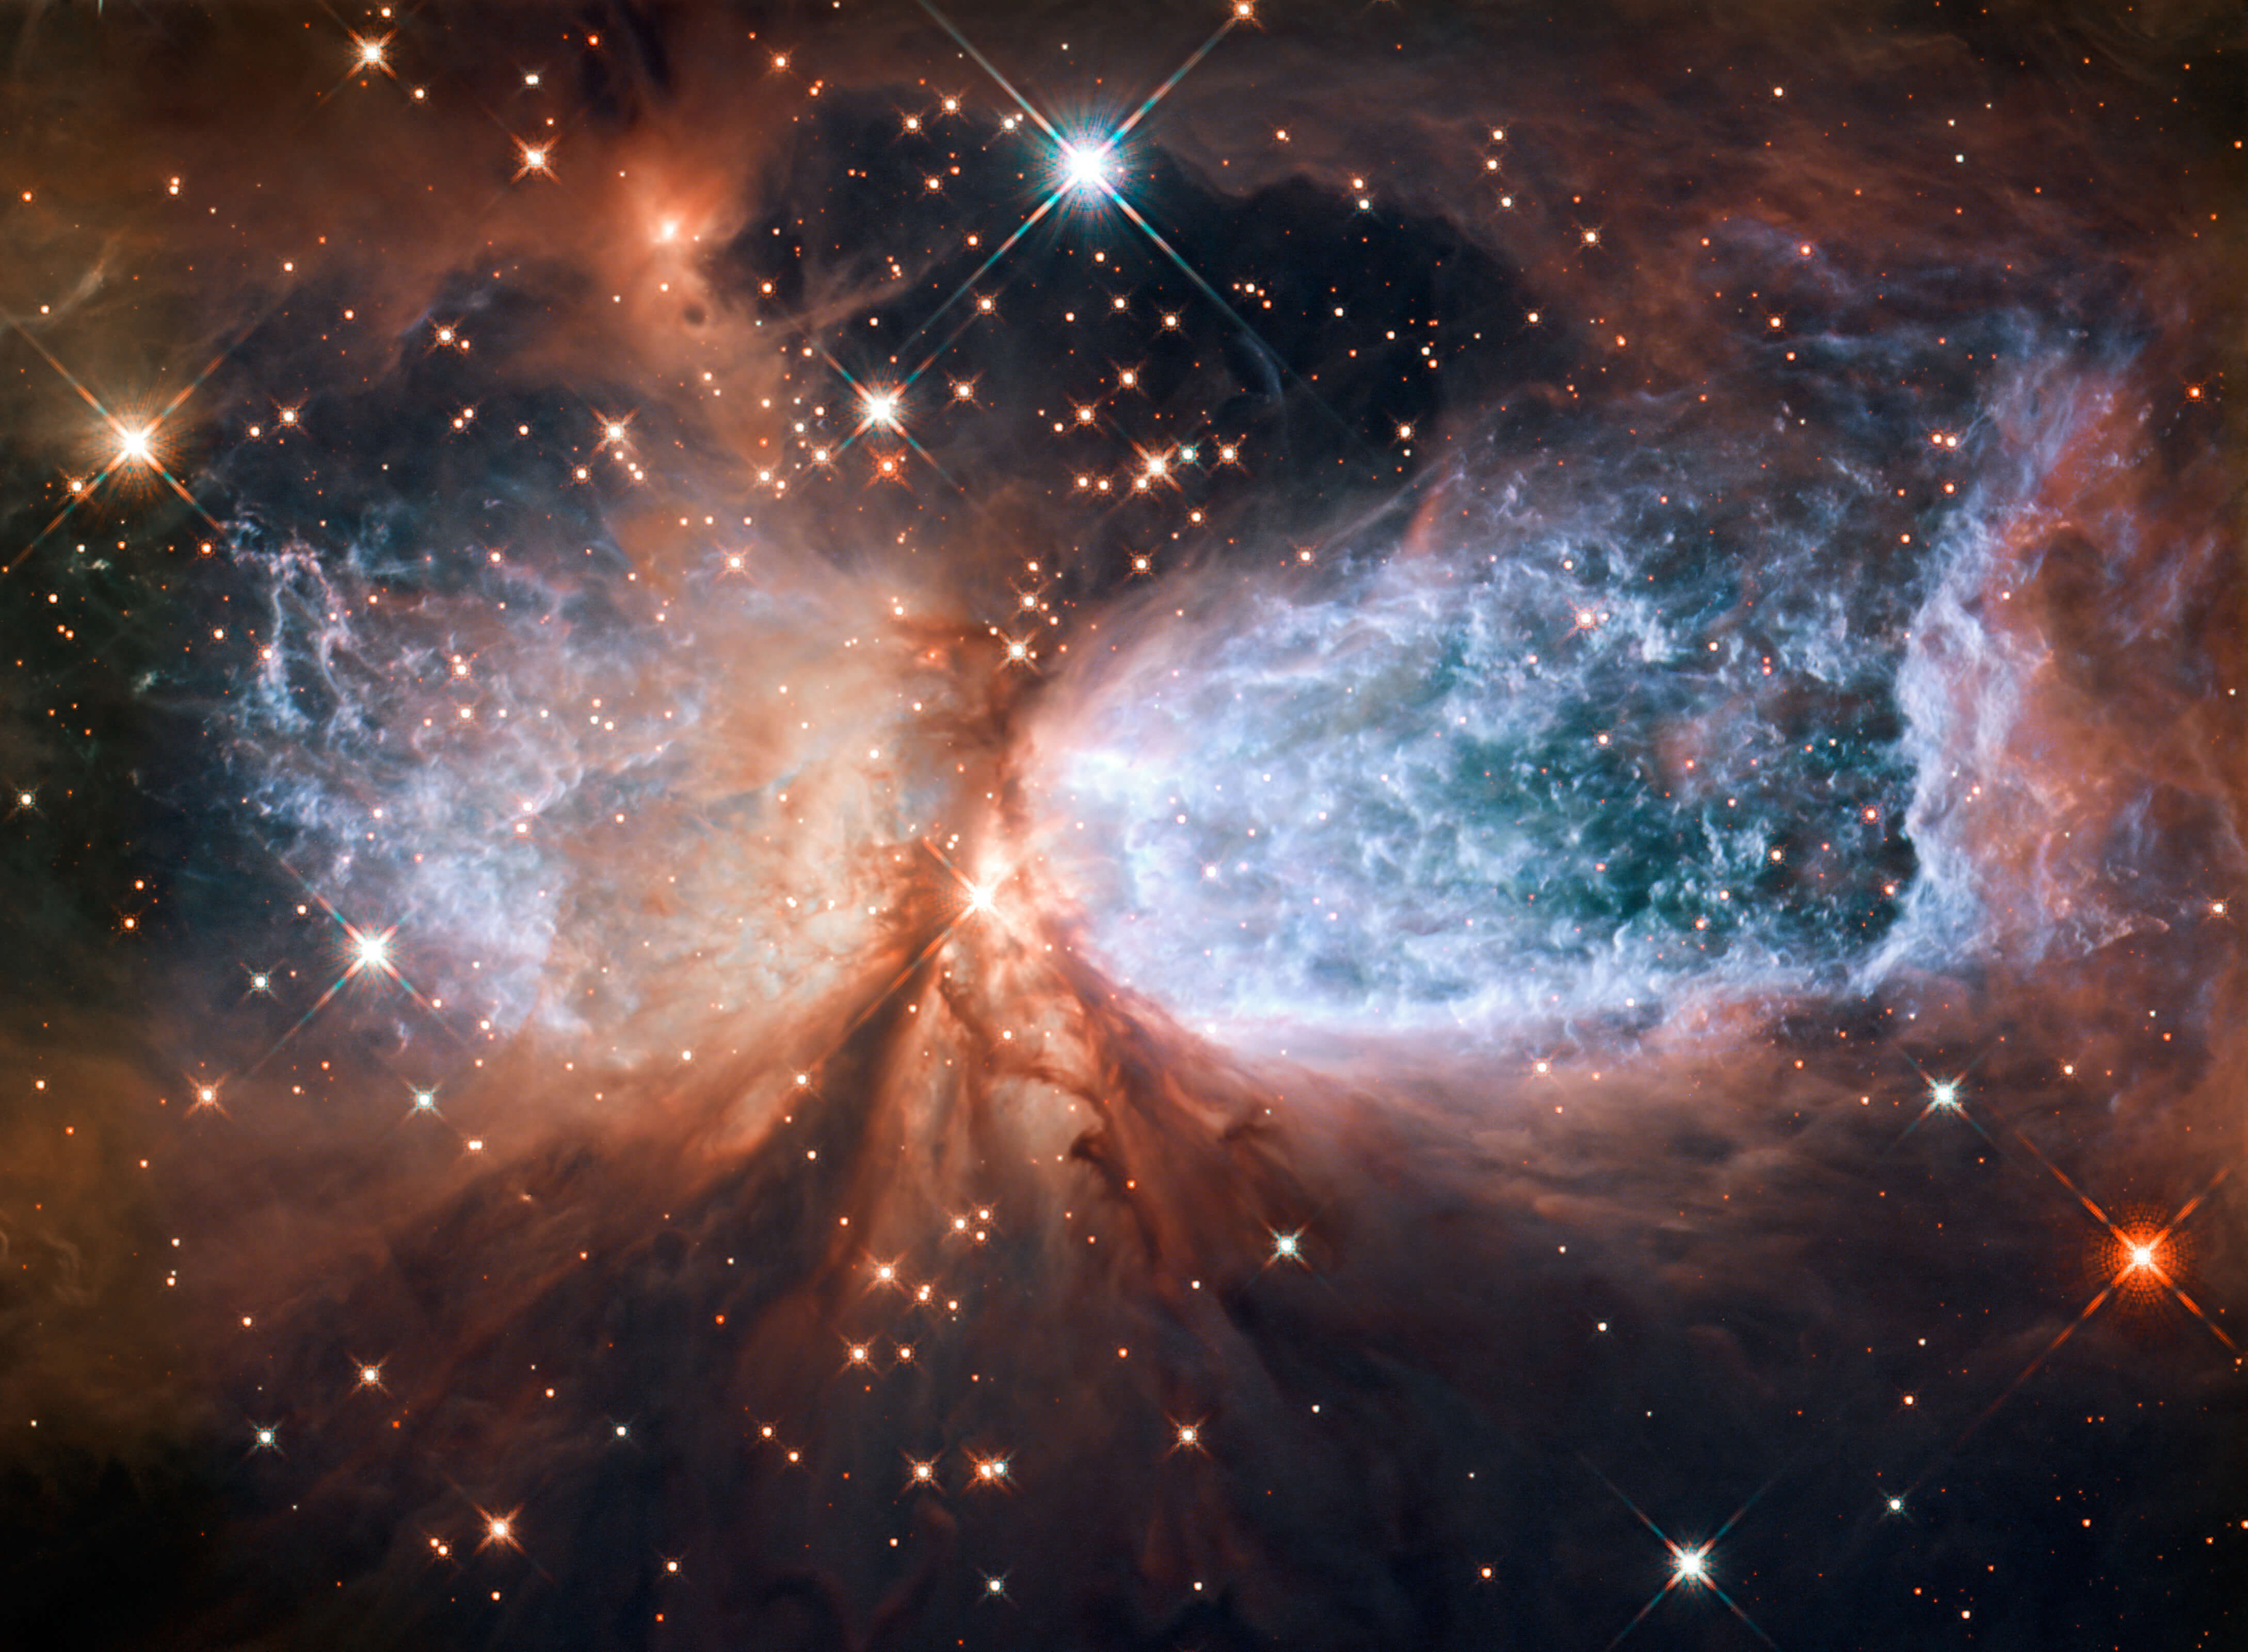 Star-forming_region_S106_(captured_by_the_Hubble_Space_Telescope)